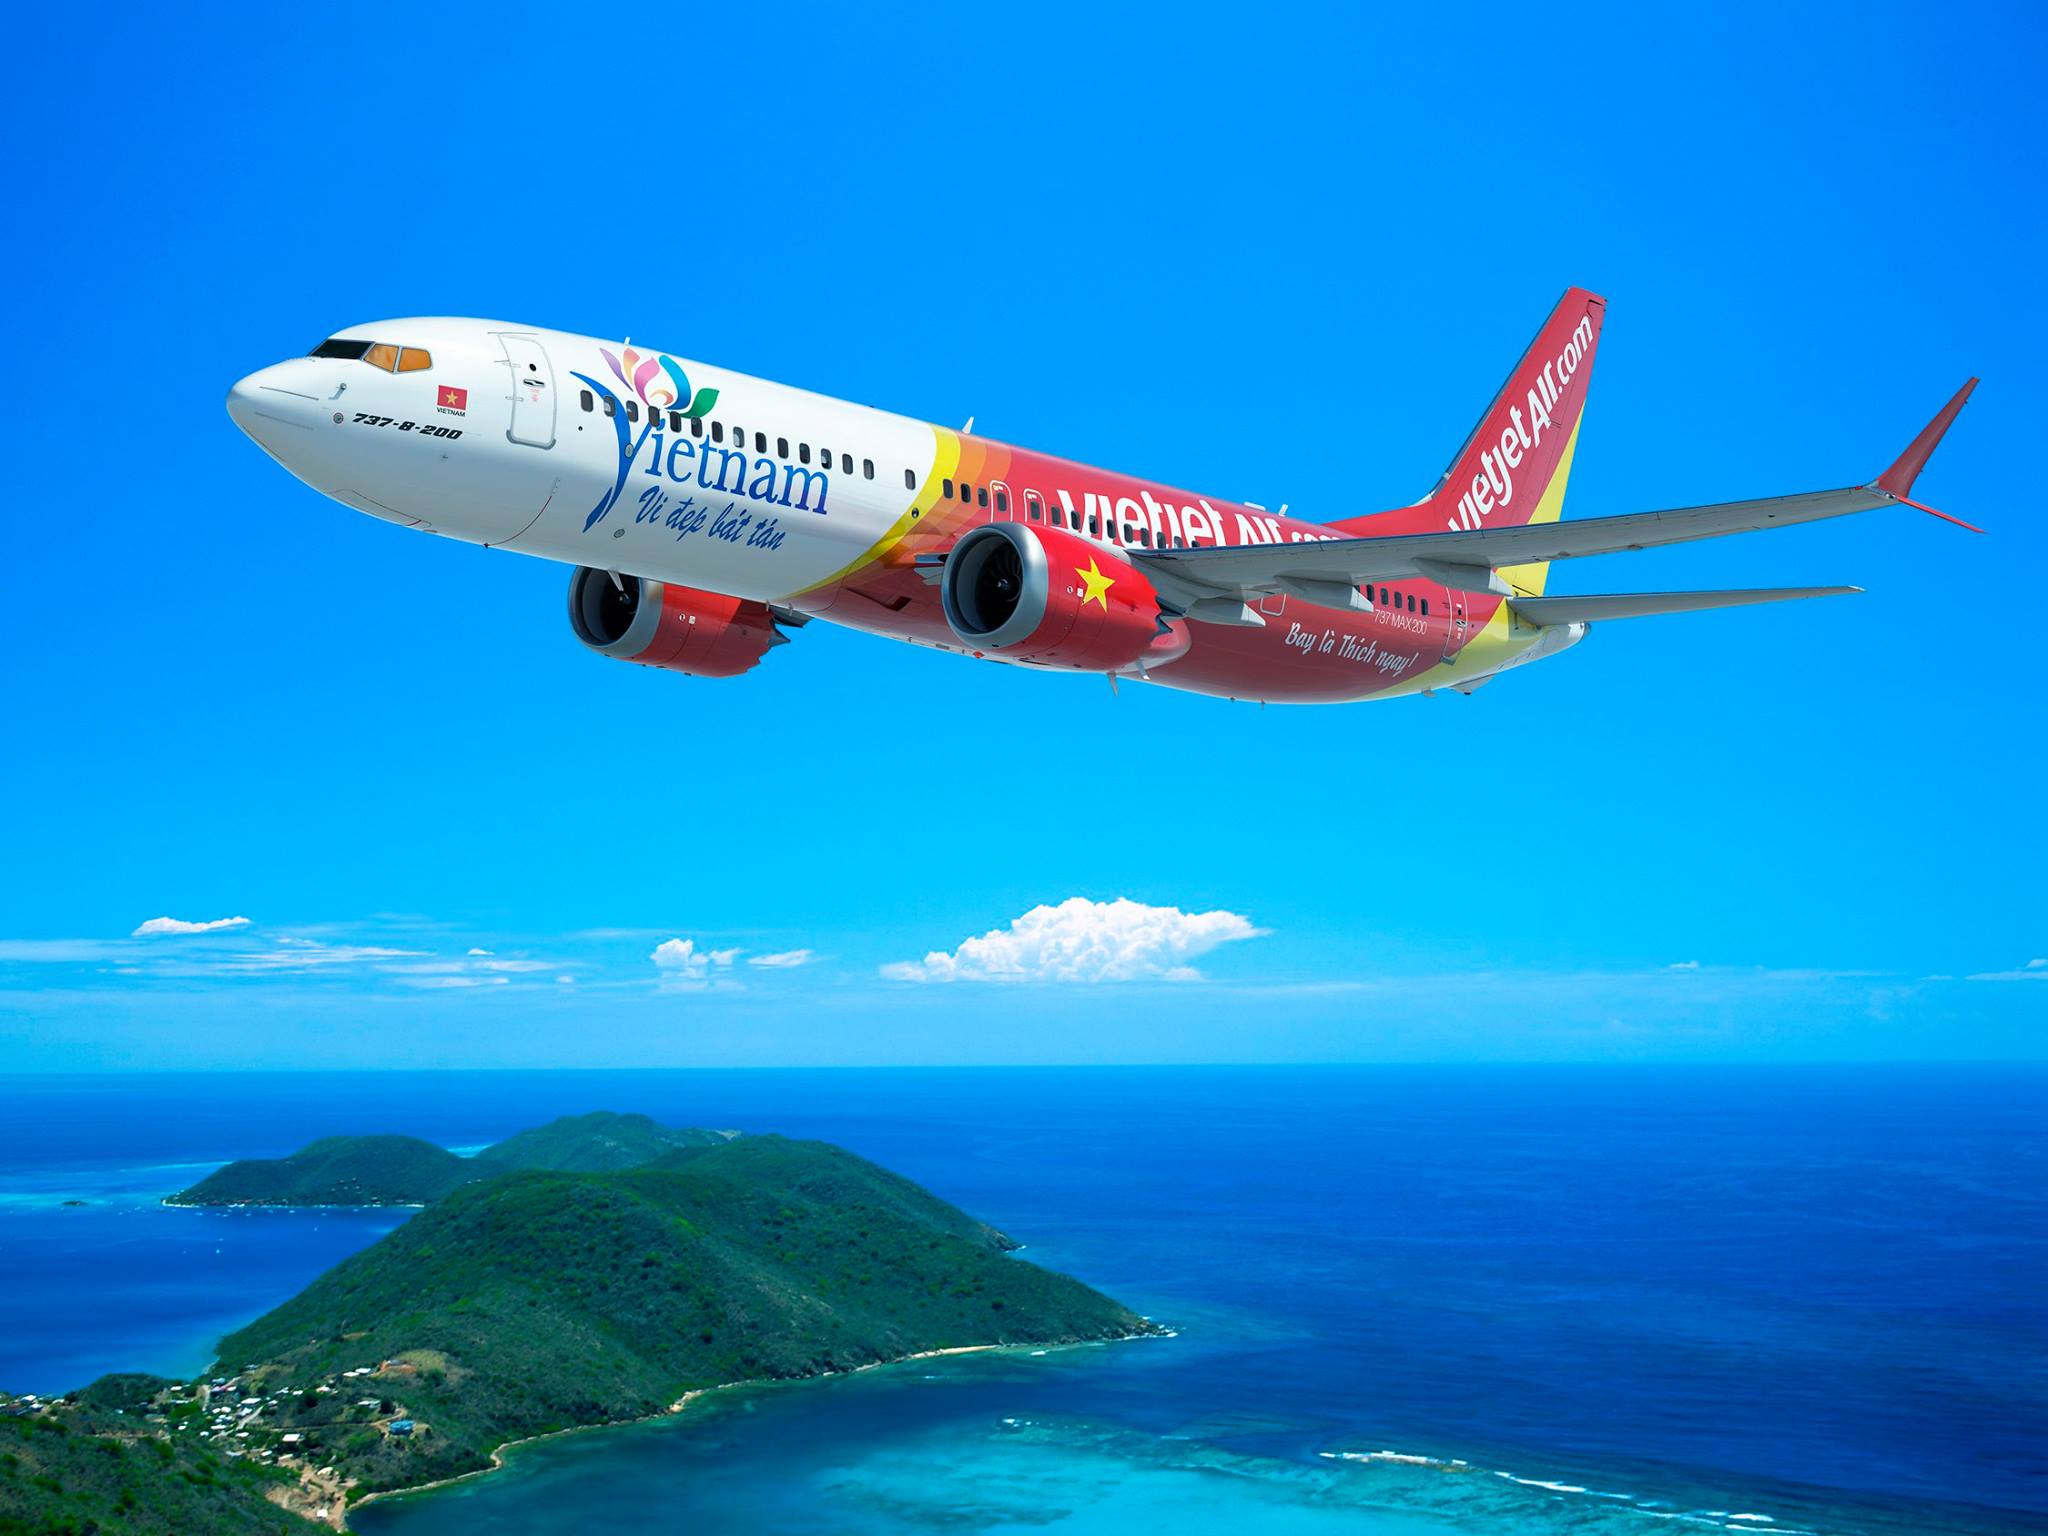 VietJet’s big promotional offer to attract Indian tourists